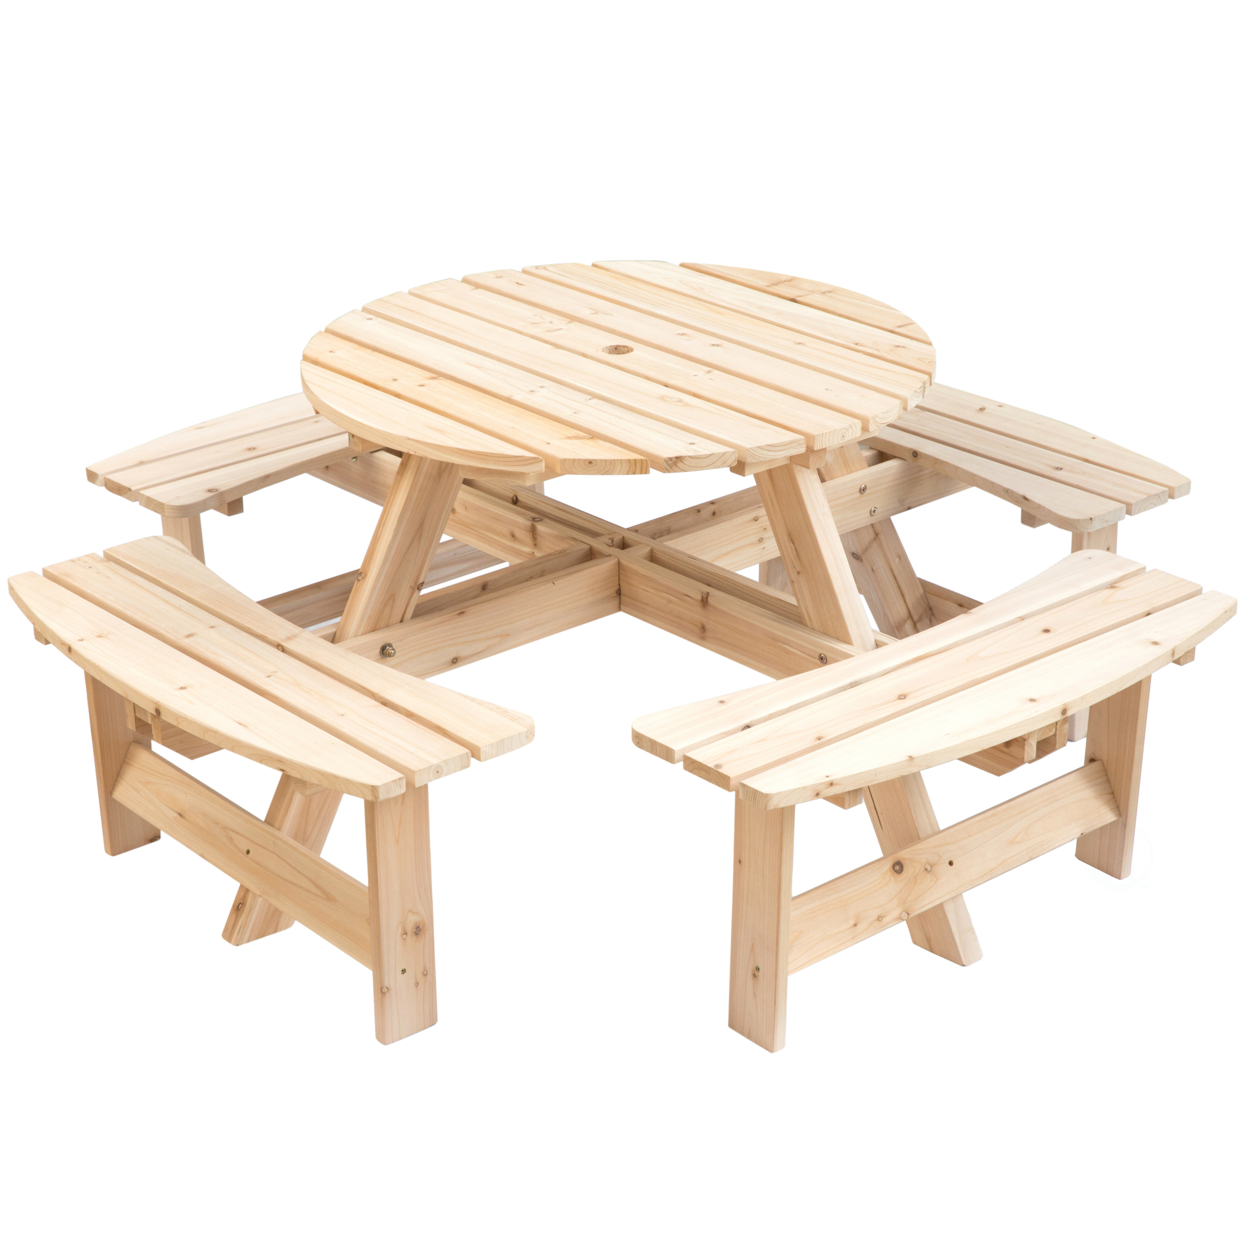 Wooden Outdoor Patio Garden Round Picnic Table with Bench, 8 Person - image 2 of 10